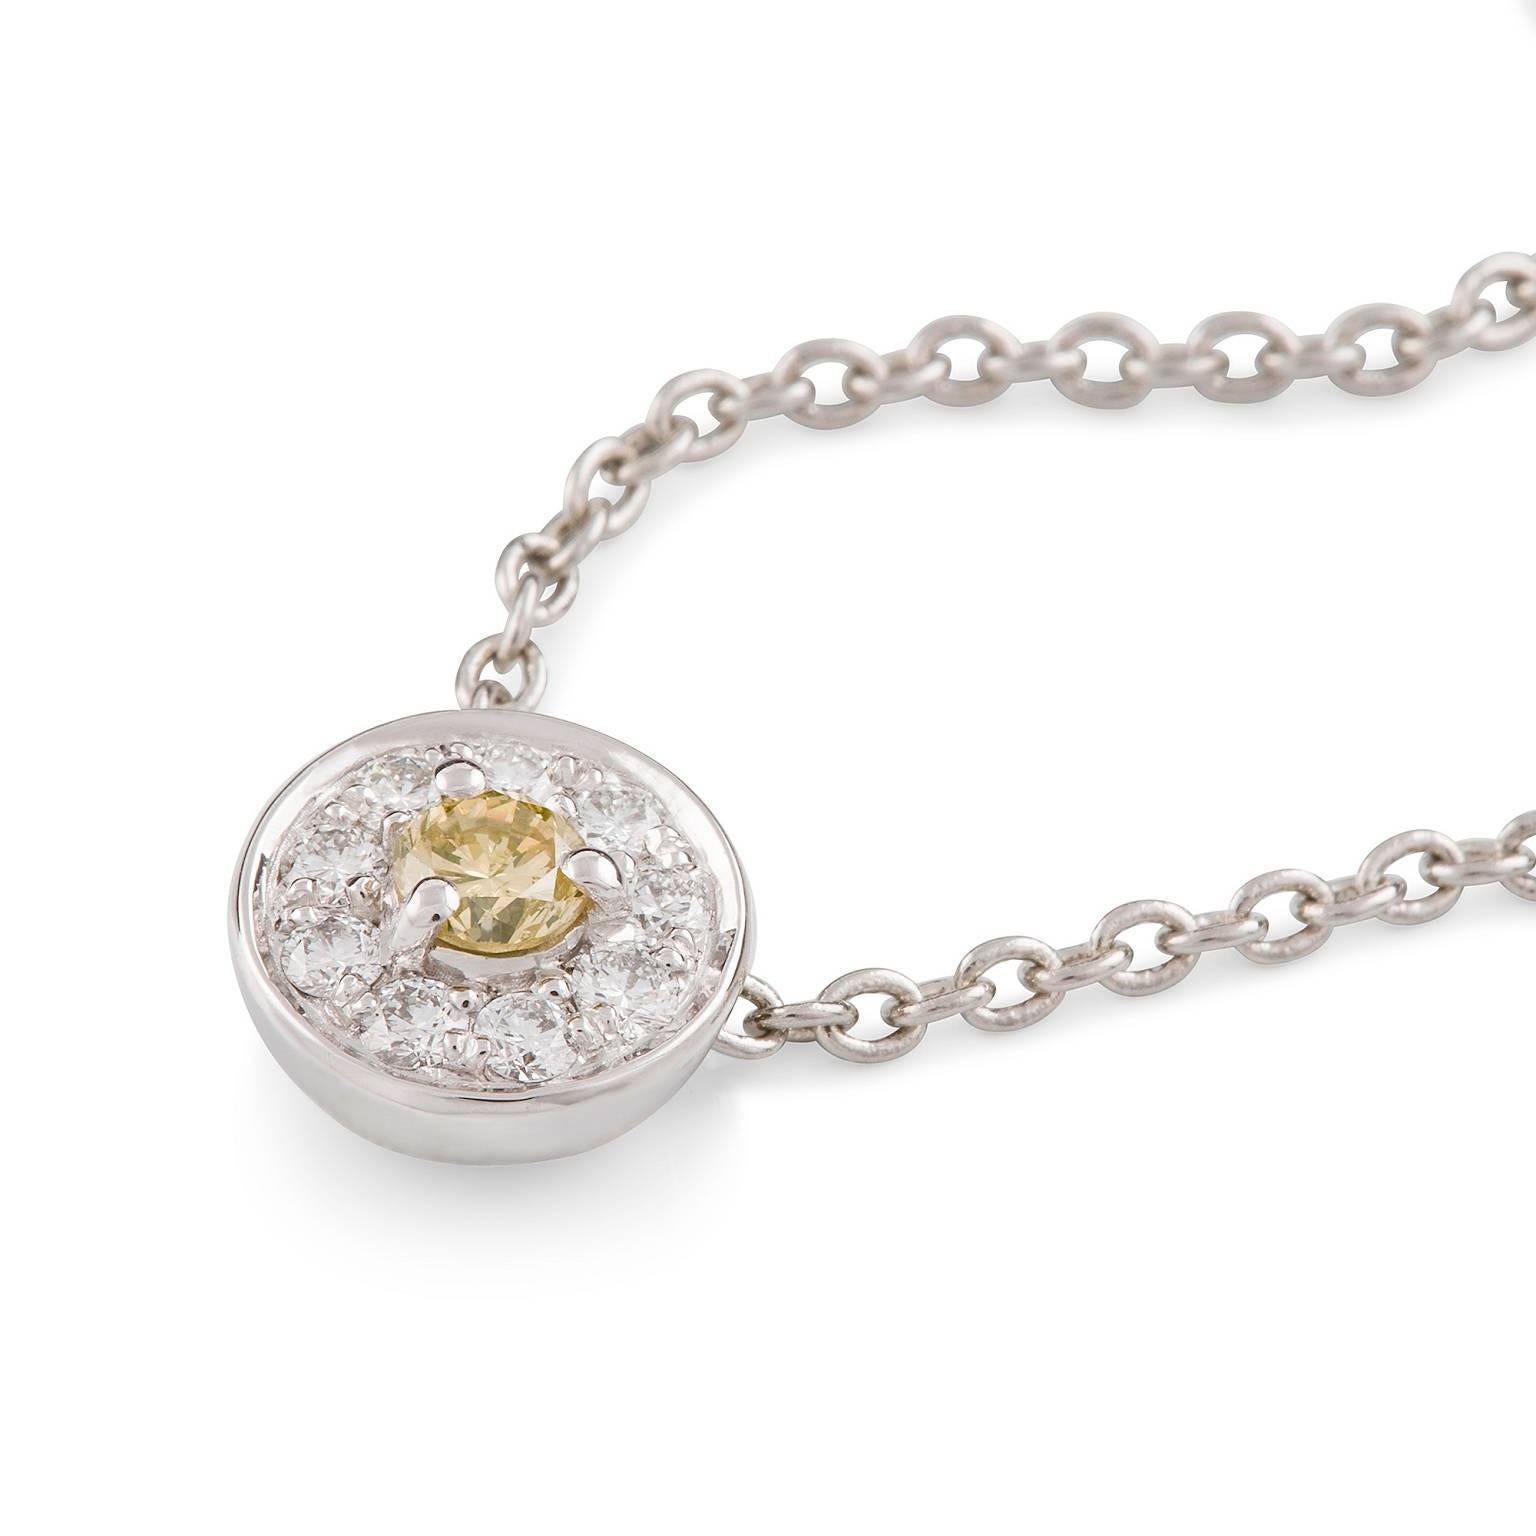 Halo Necklace

This gorgeous petite pendant features a stunning fancy yellow diamond surrounded by a halo of white diamonds. The circular setting is suspended from an elegant trace chain.

Round brilliant cut diamond: fancy yellow colour, VS2